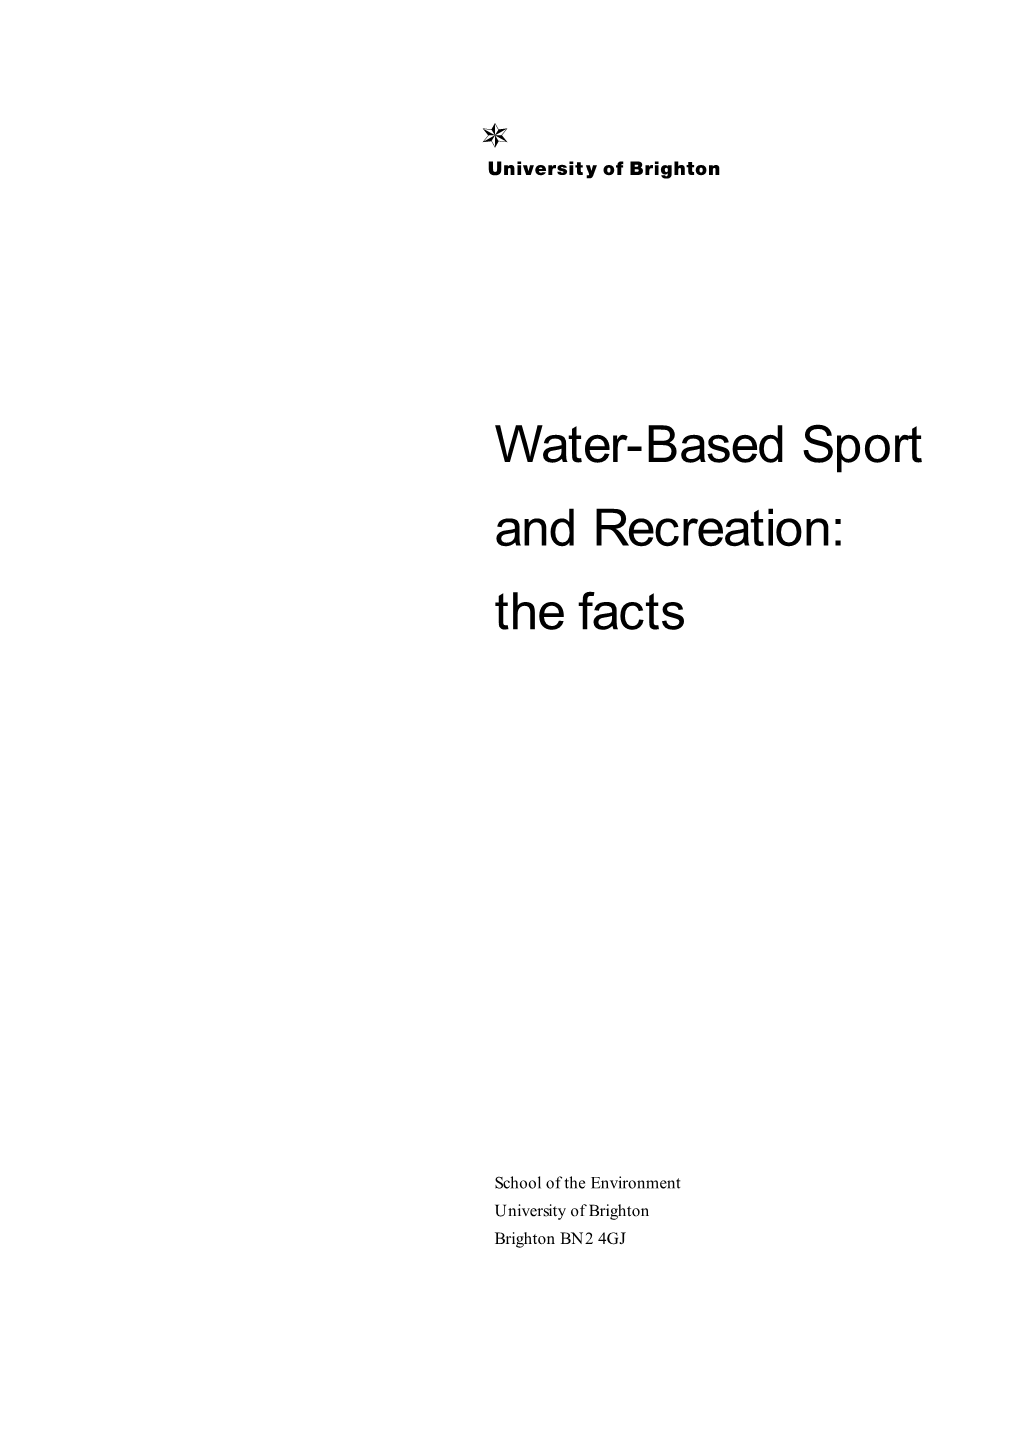 Water-Based Sport and Recreation: the Facts